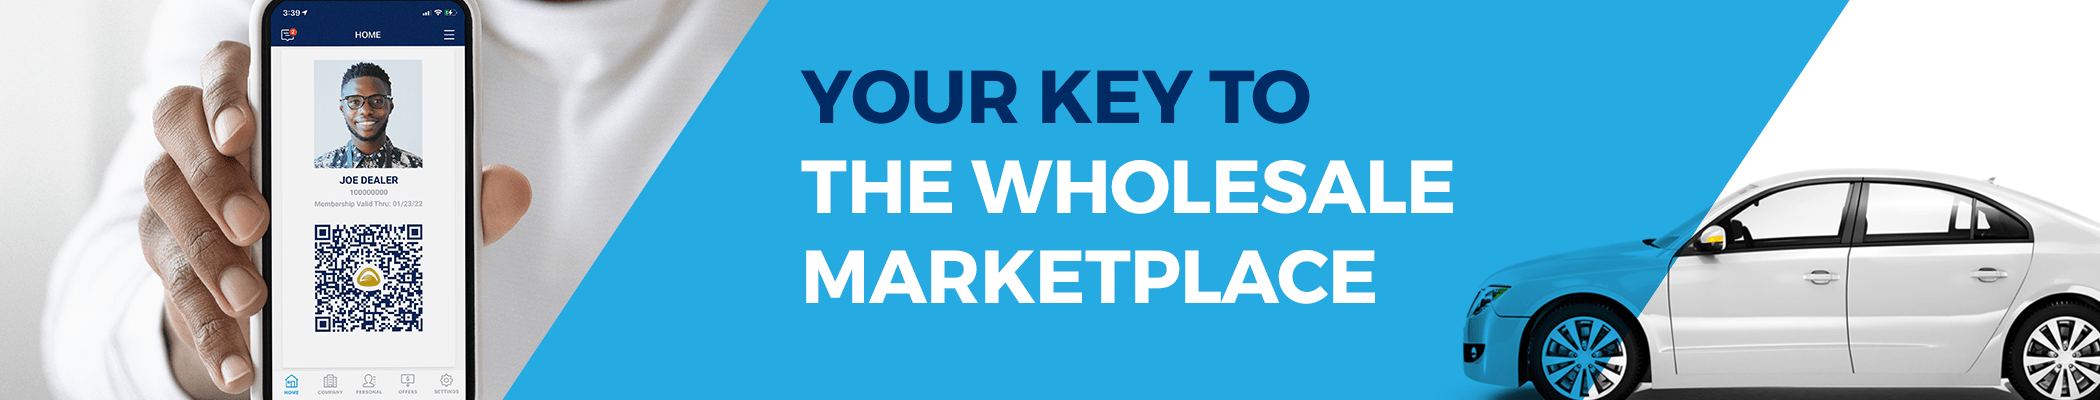 Your Key to the Wholesale Marketplace